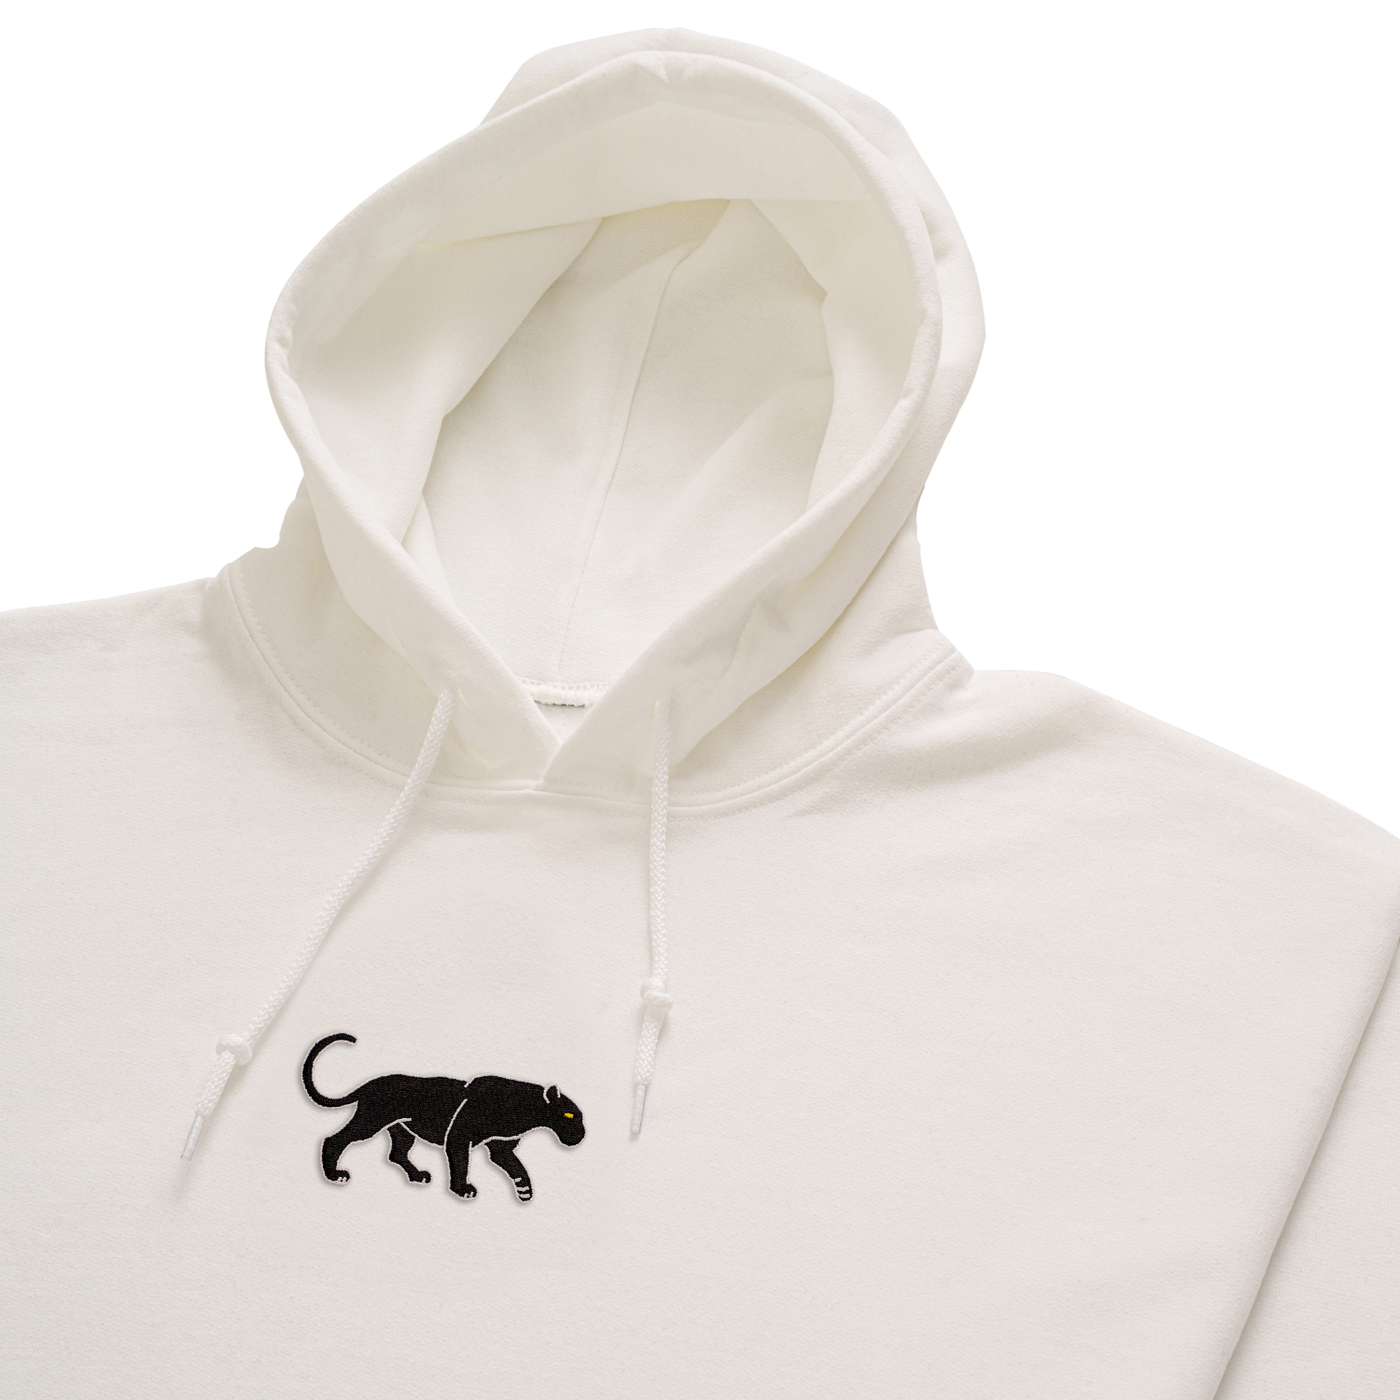 Bobby's Planet Women's Embroidered Black Jaguar Hoodie from South American Amazon Animals Collection in White Color#color_white